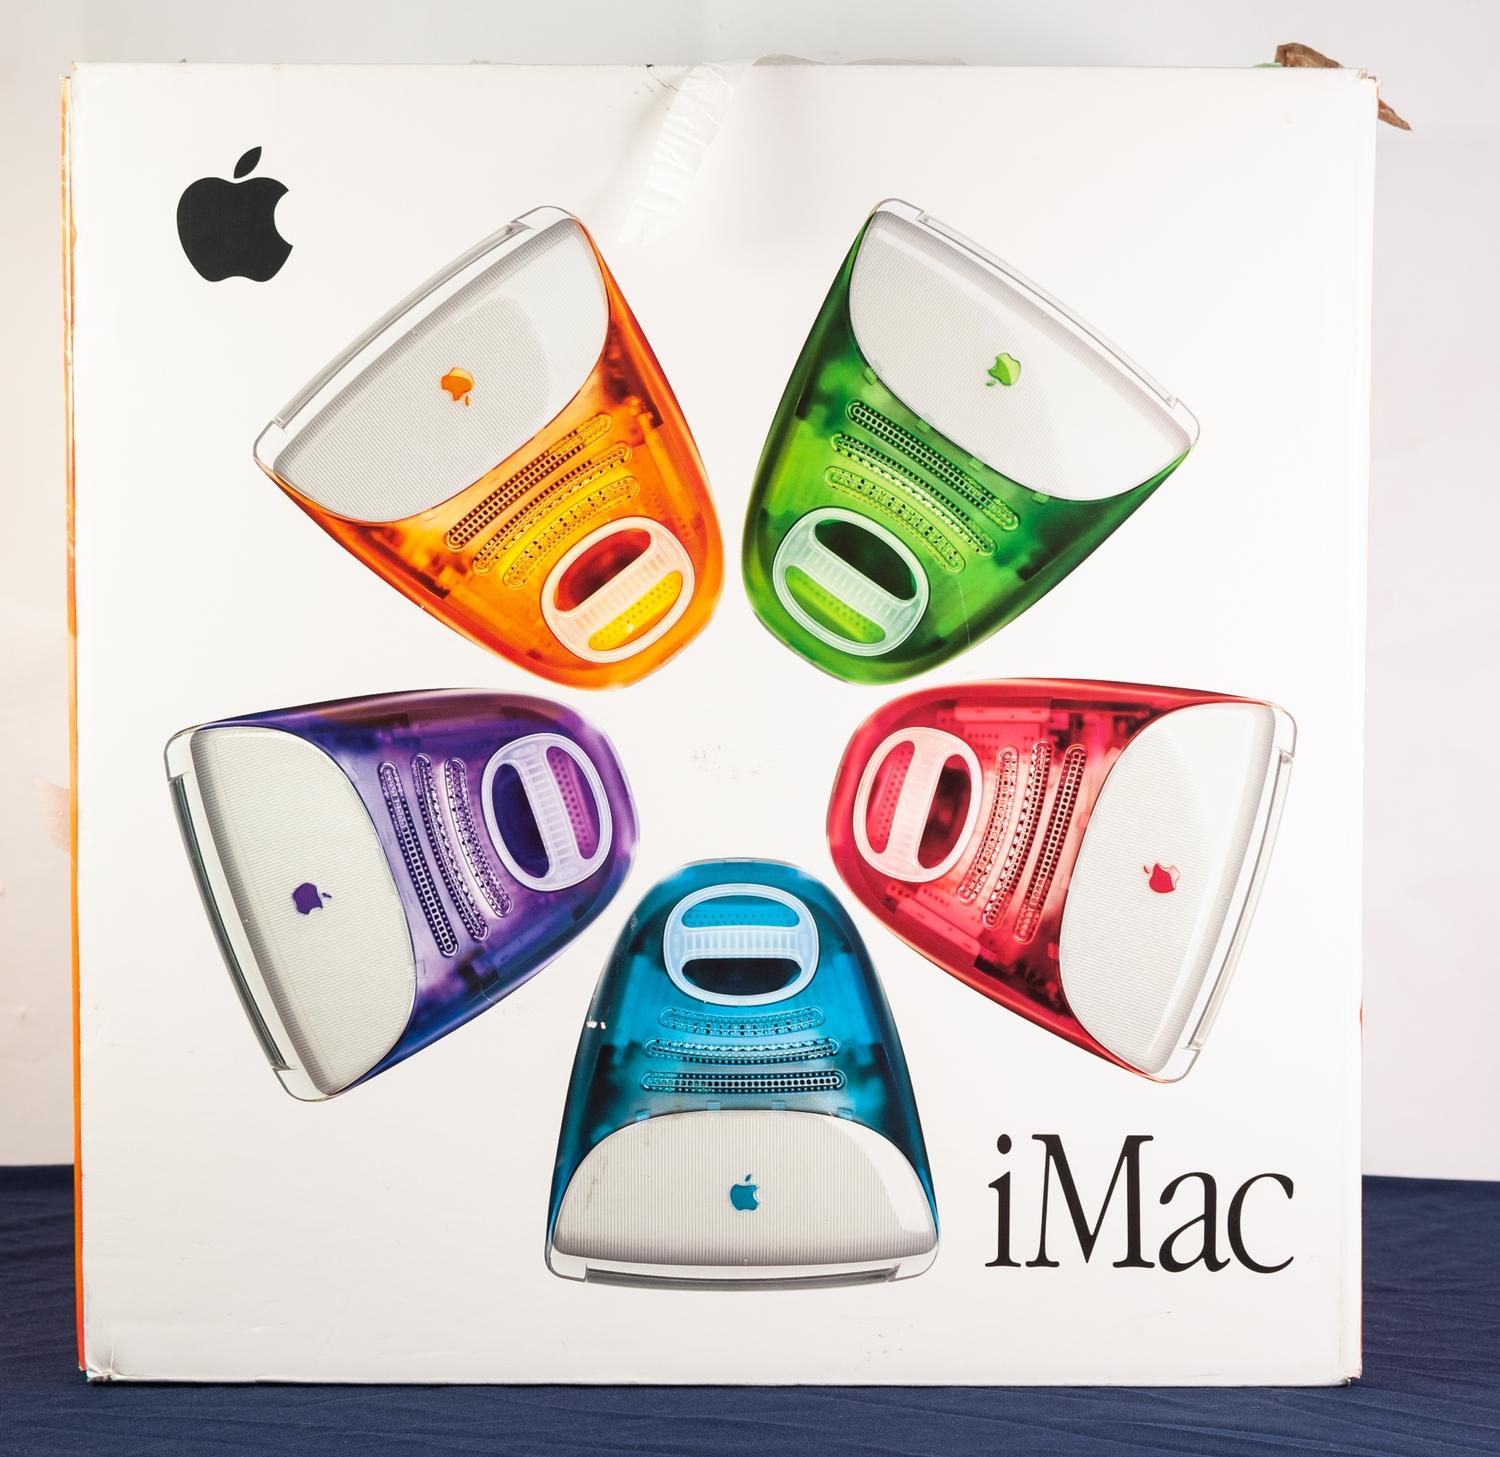 iMAC G3, LIME, VERSION 8.6, 14 INCH DISPLAY, APPLE KEYBOARD AND APPLE MOUSE, IN ORIGINAL BOX WITH - Image 7 of 7